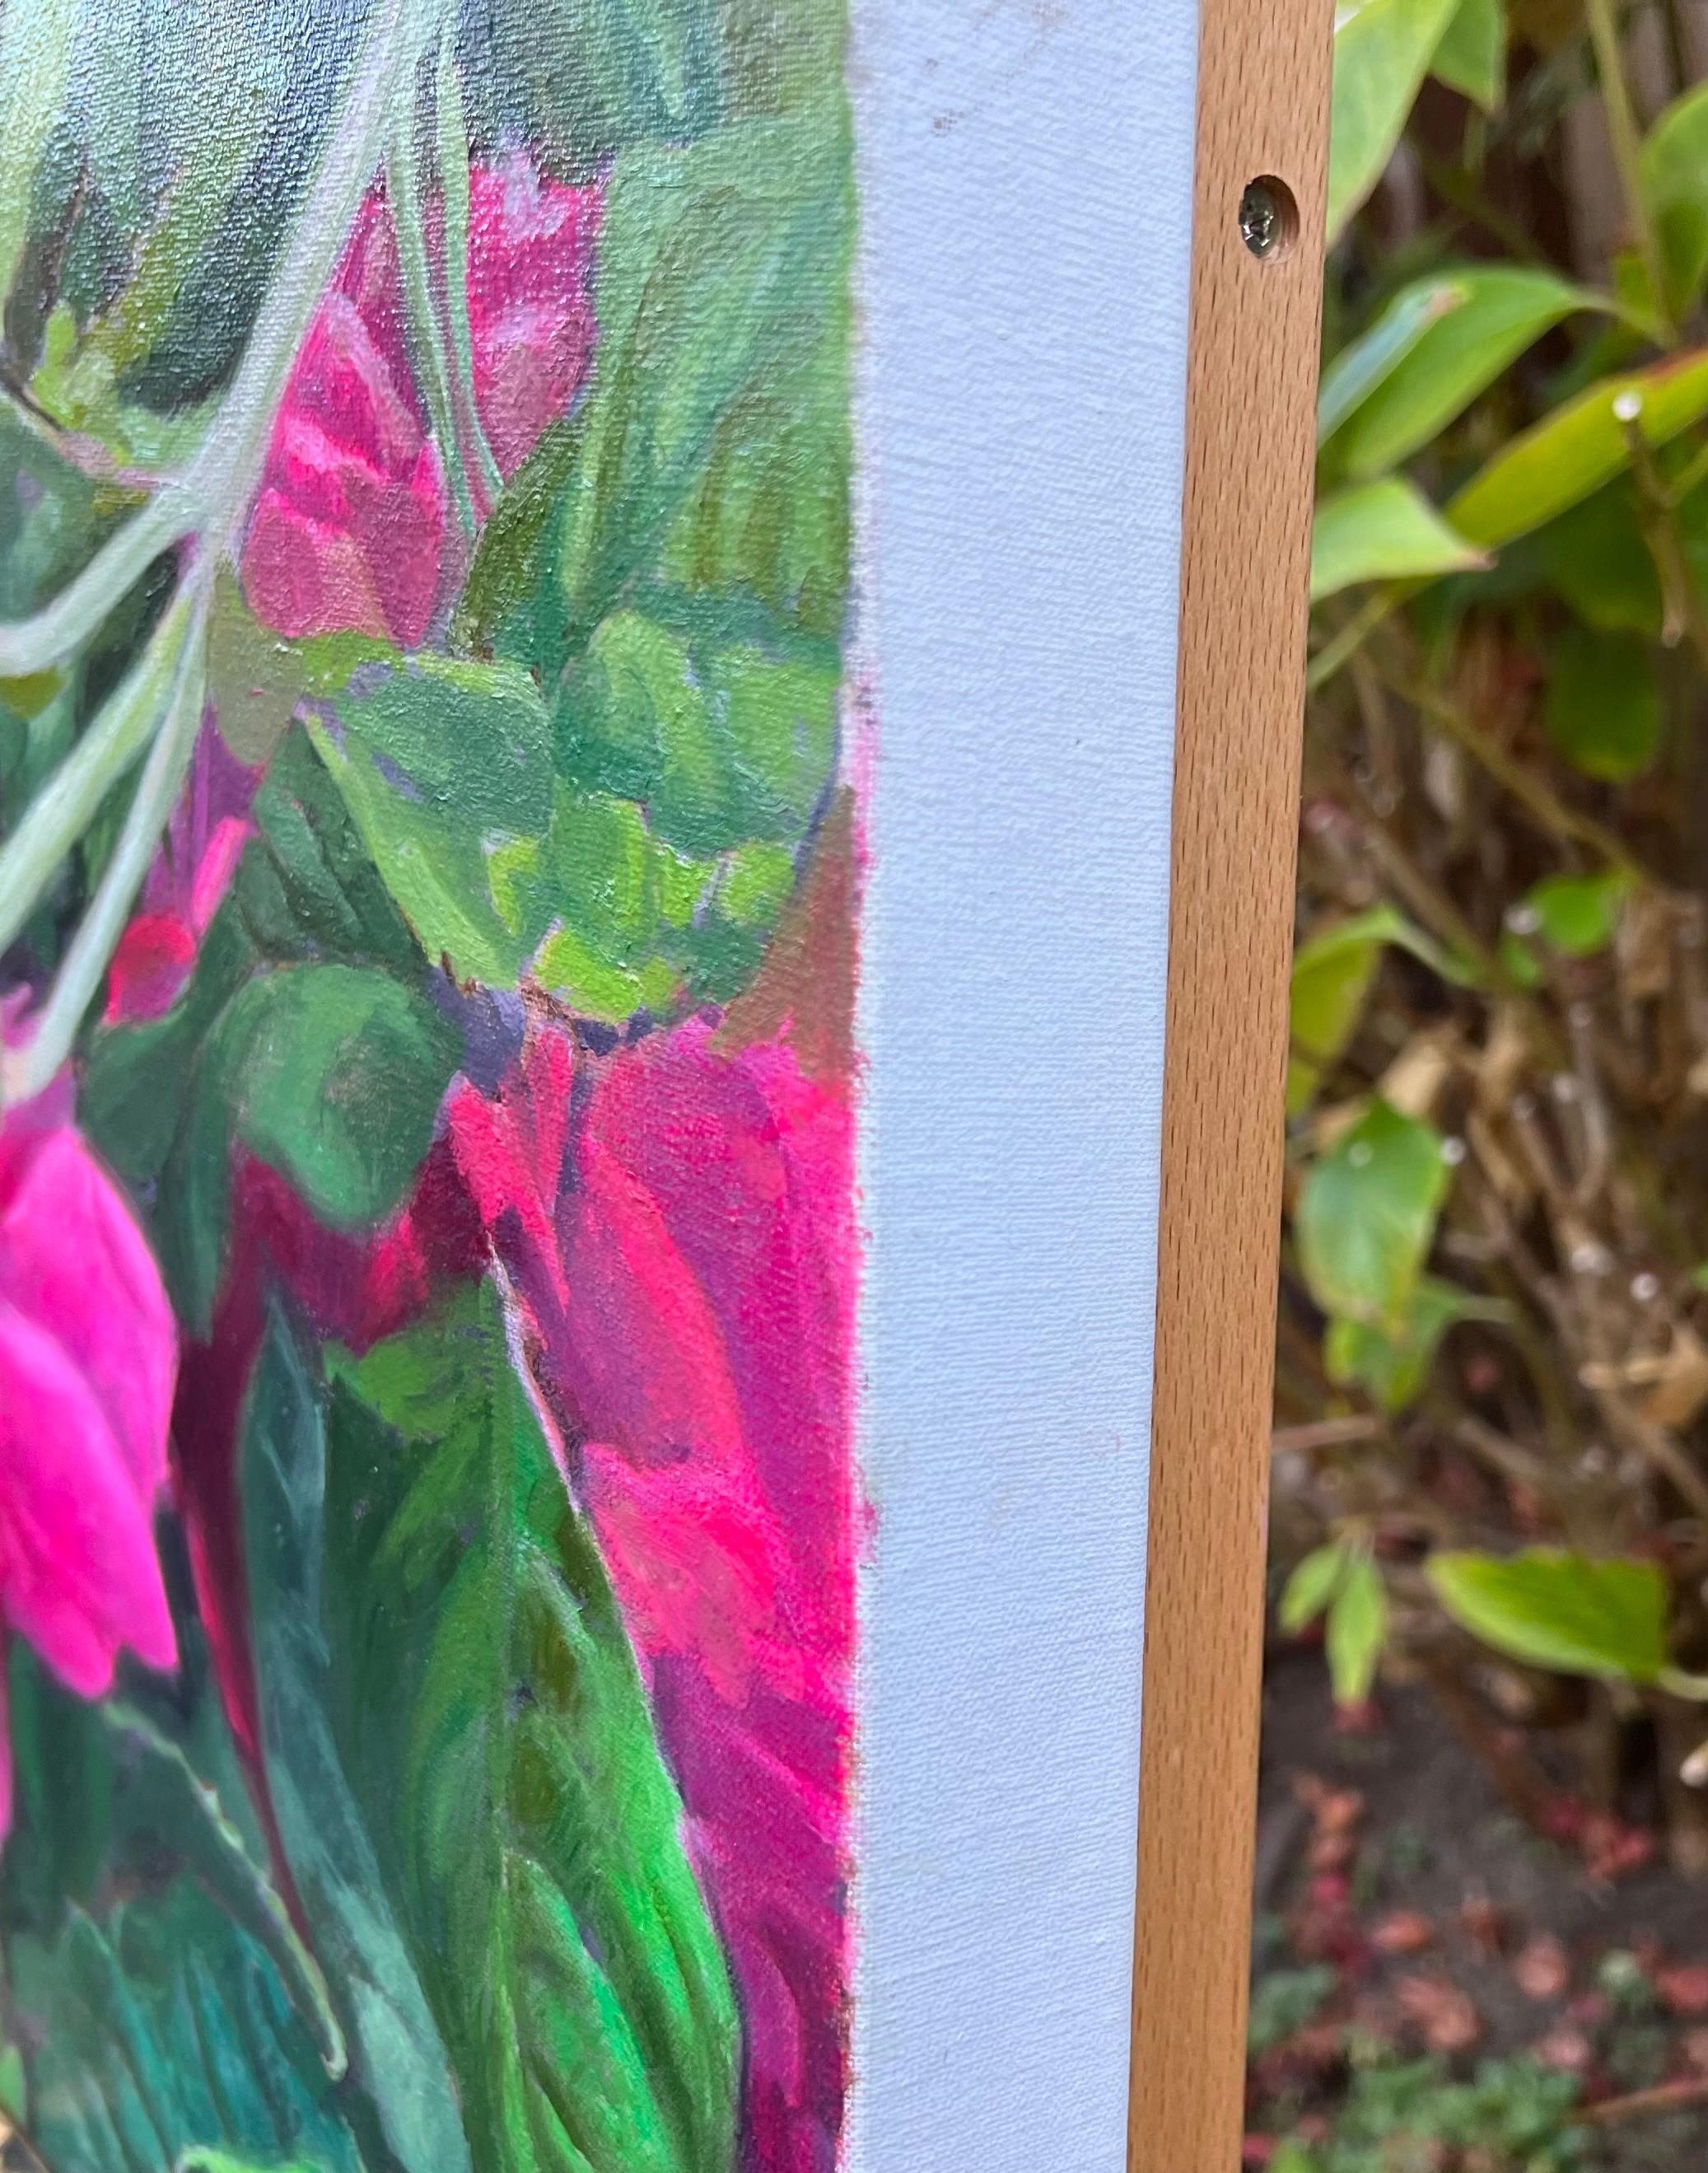 <p>Artist Comments<br>Bright pink roses rest on a bed of vibrant green leaves. The sun shines, casting a warm glow and a gentle shadow across the garden. For artist Hilary Gomes, a composition like this serves as a metaphor for life and love. The